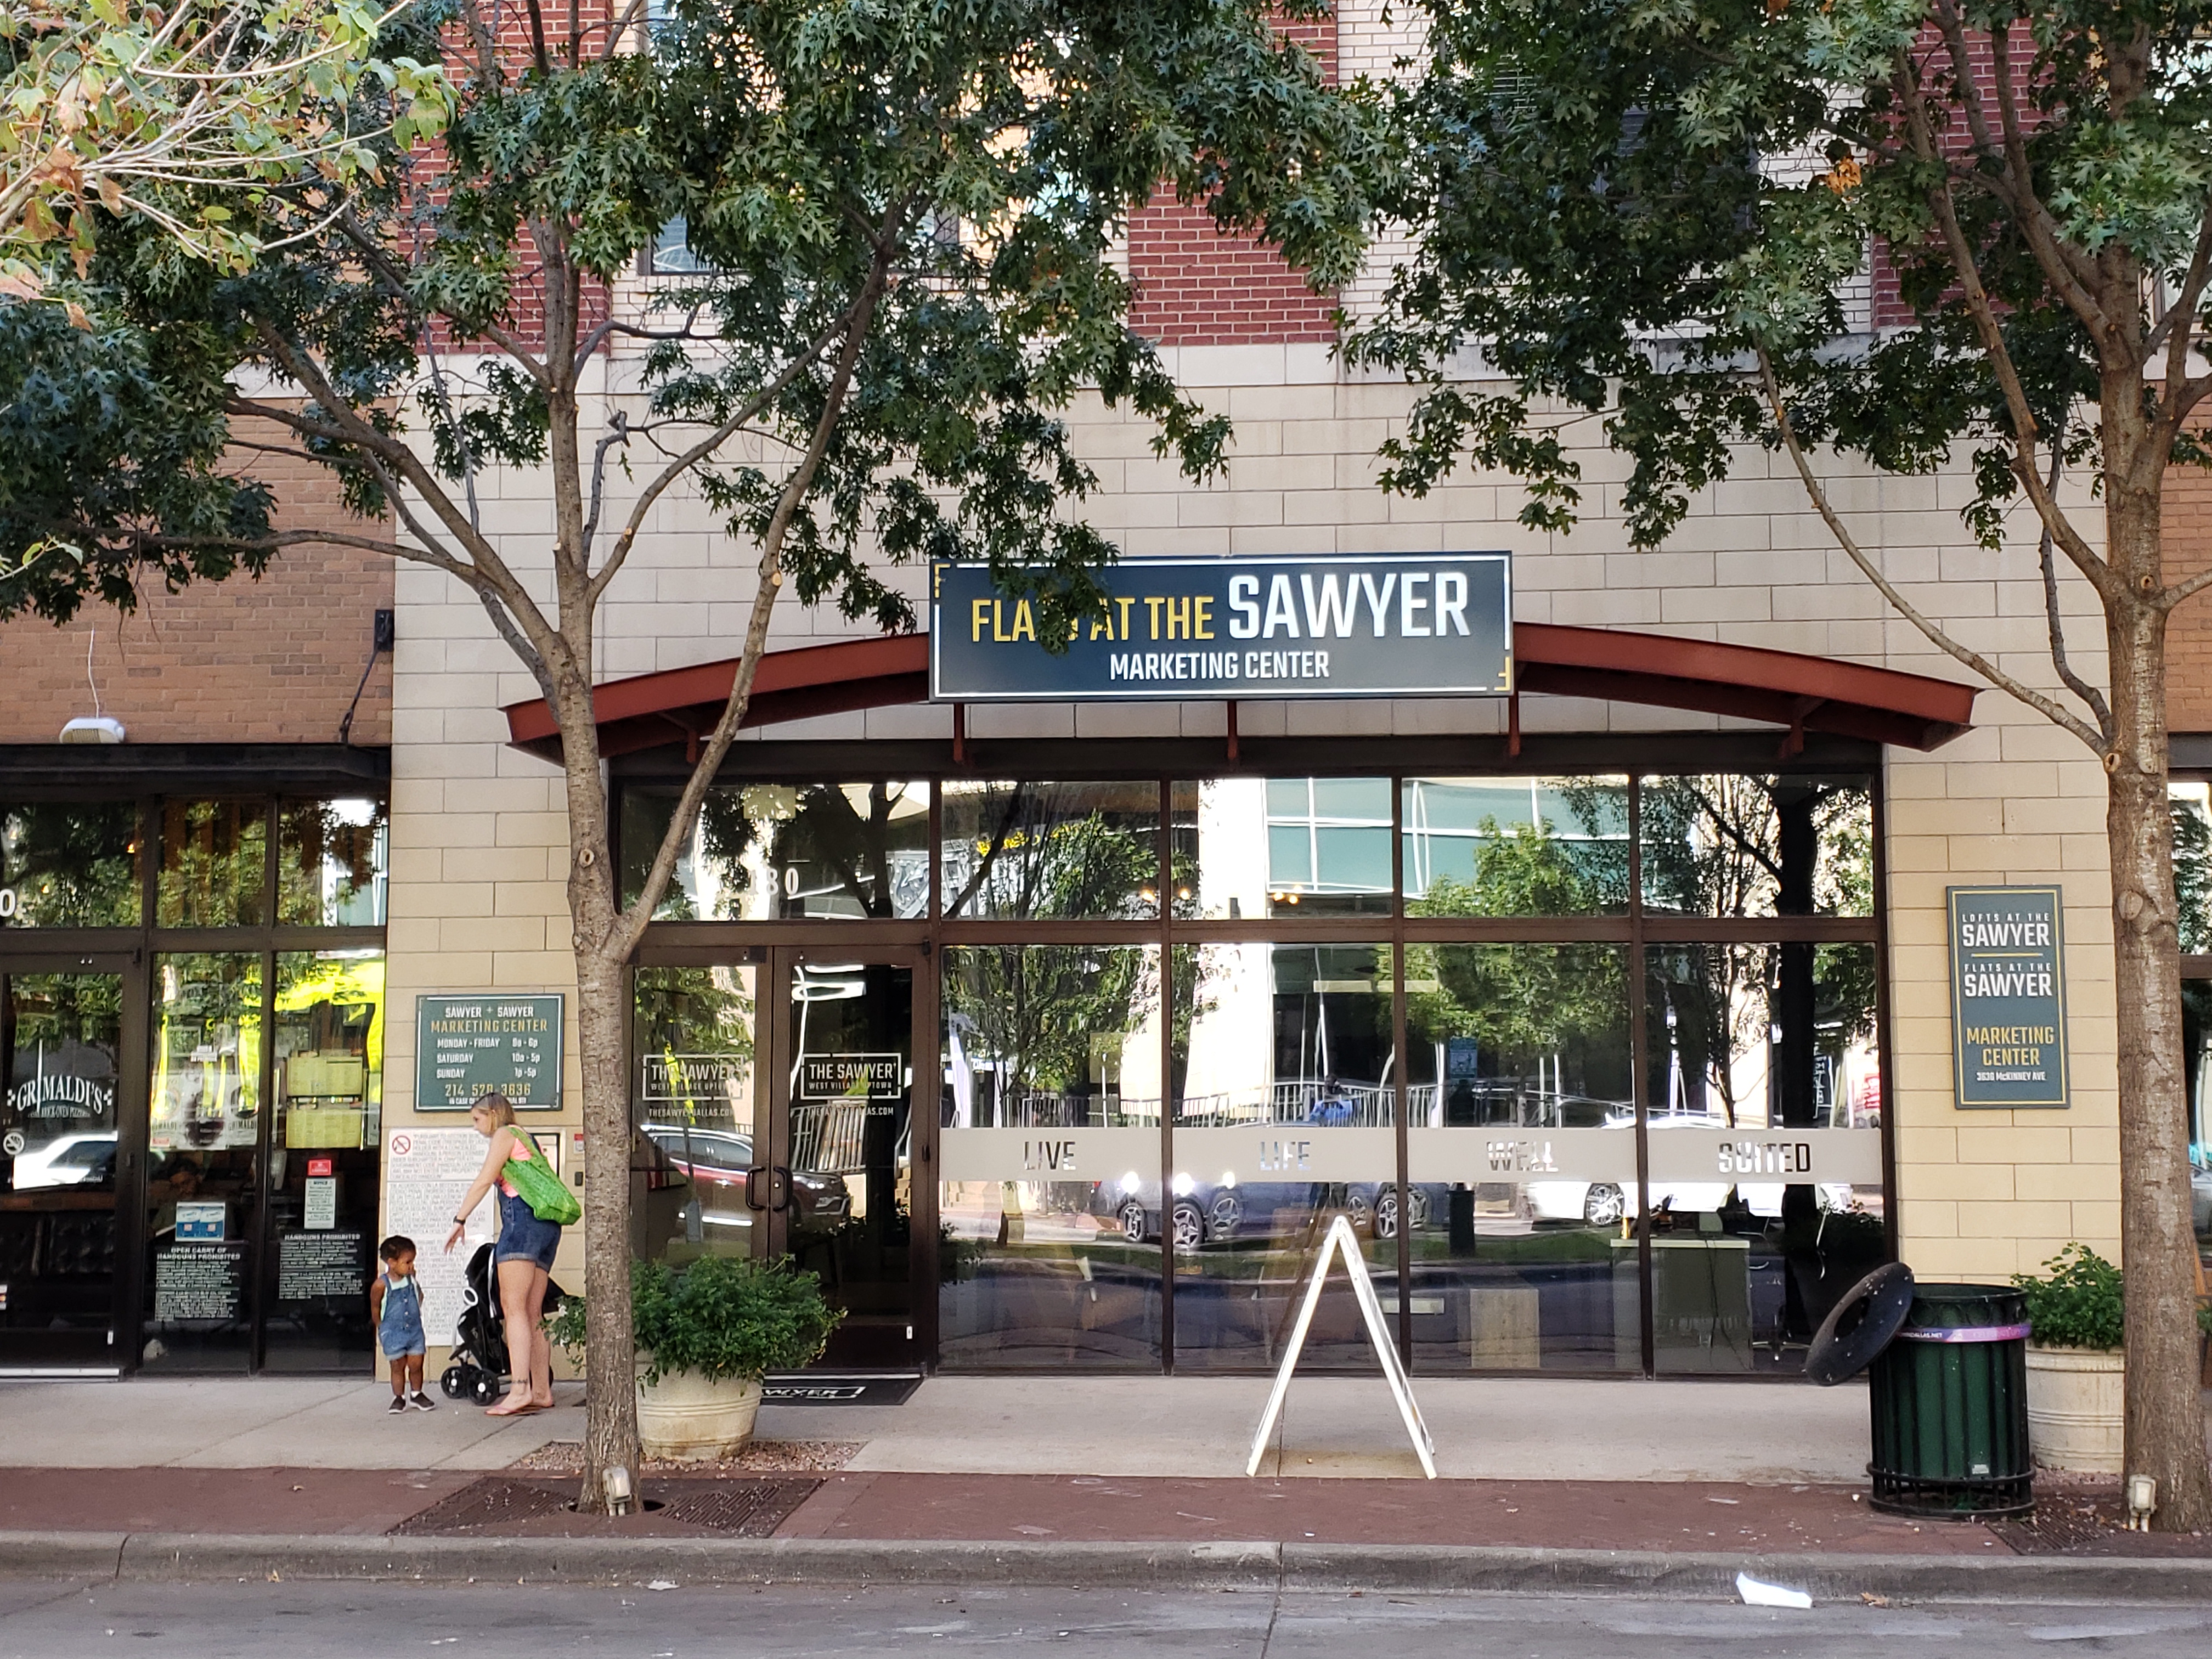 Uptown Dallas Aparments - 5 minute guide